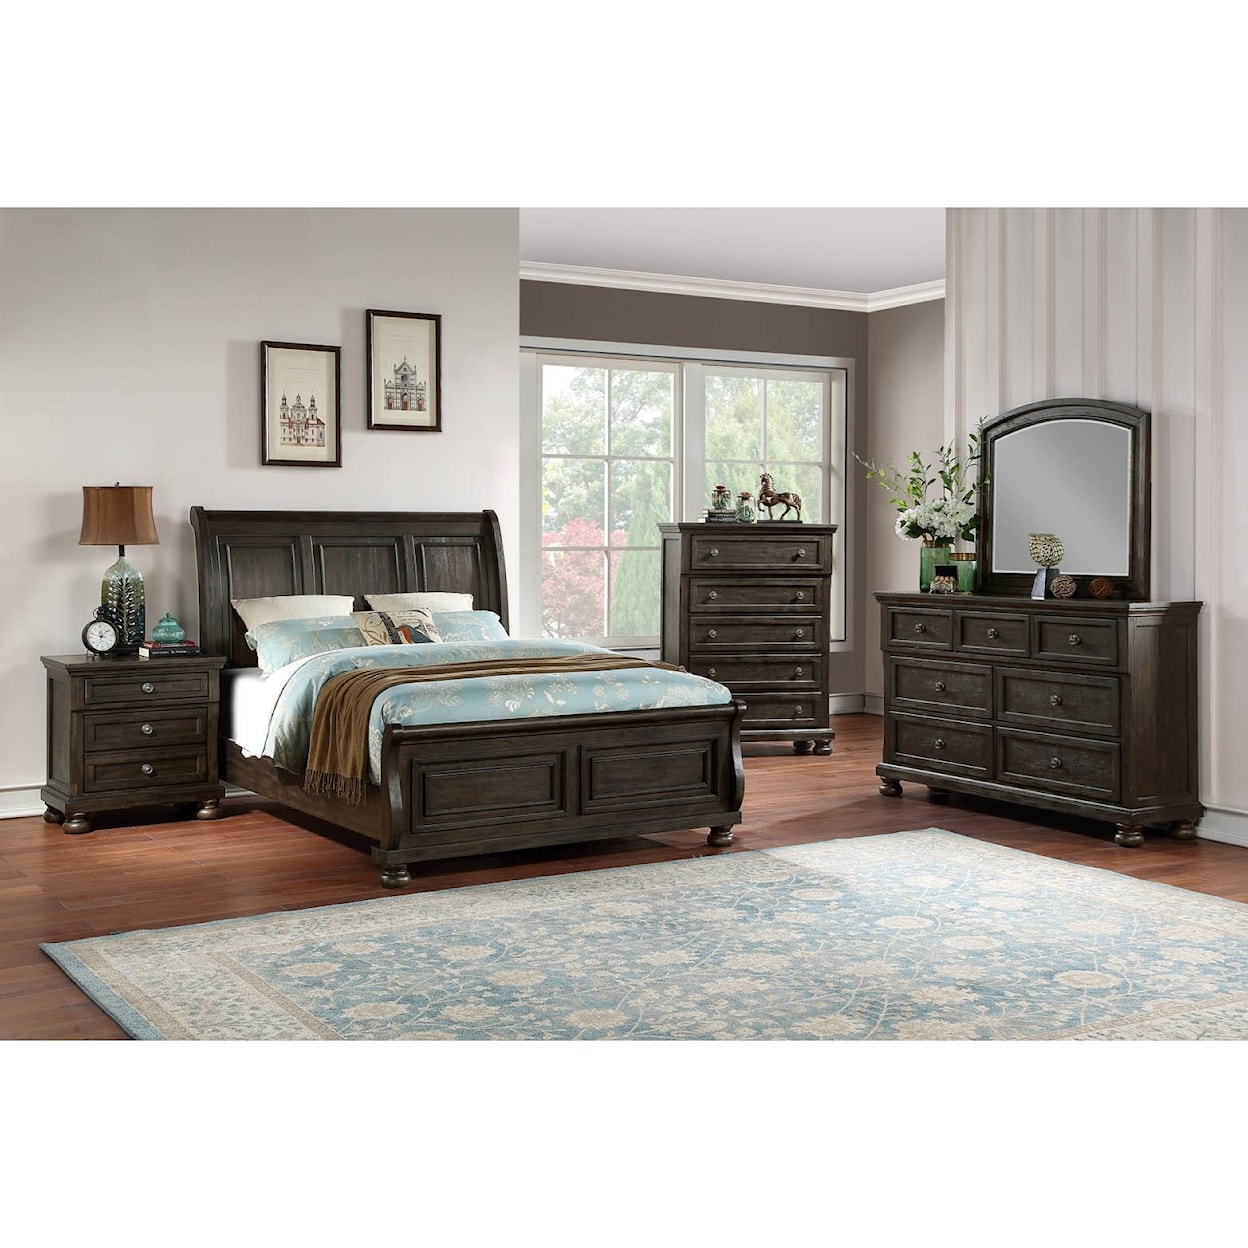 Avalon Furniture B02255 Queen Bedroom Group